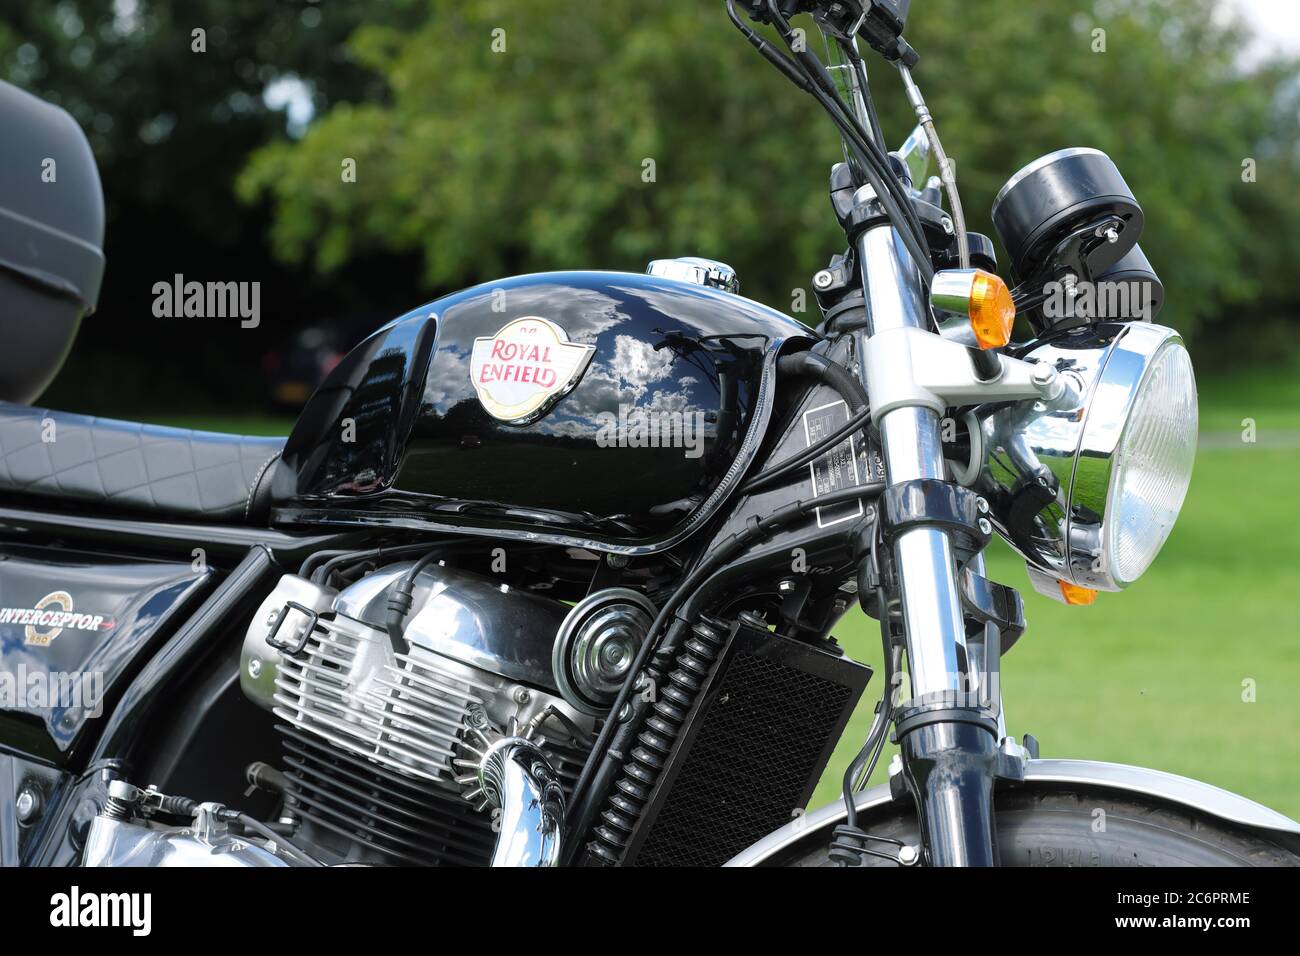 Royal Enfield Interceptor 650cc motorcycle seen in the UK 2020 Stock Photo